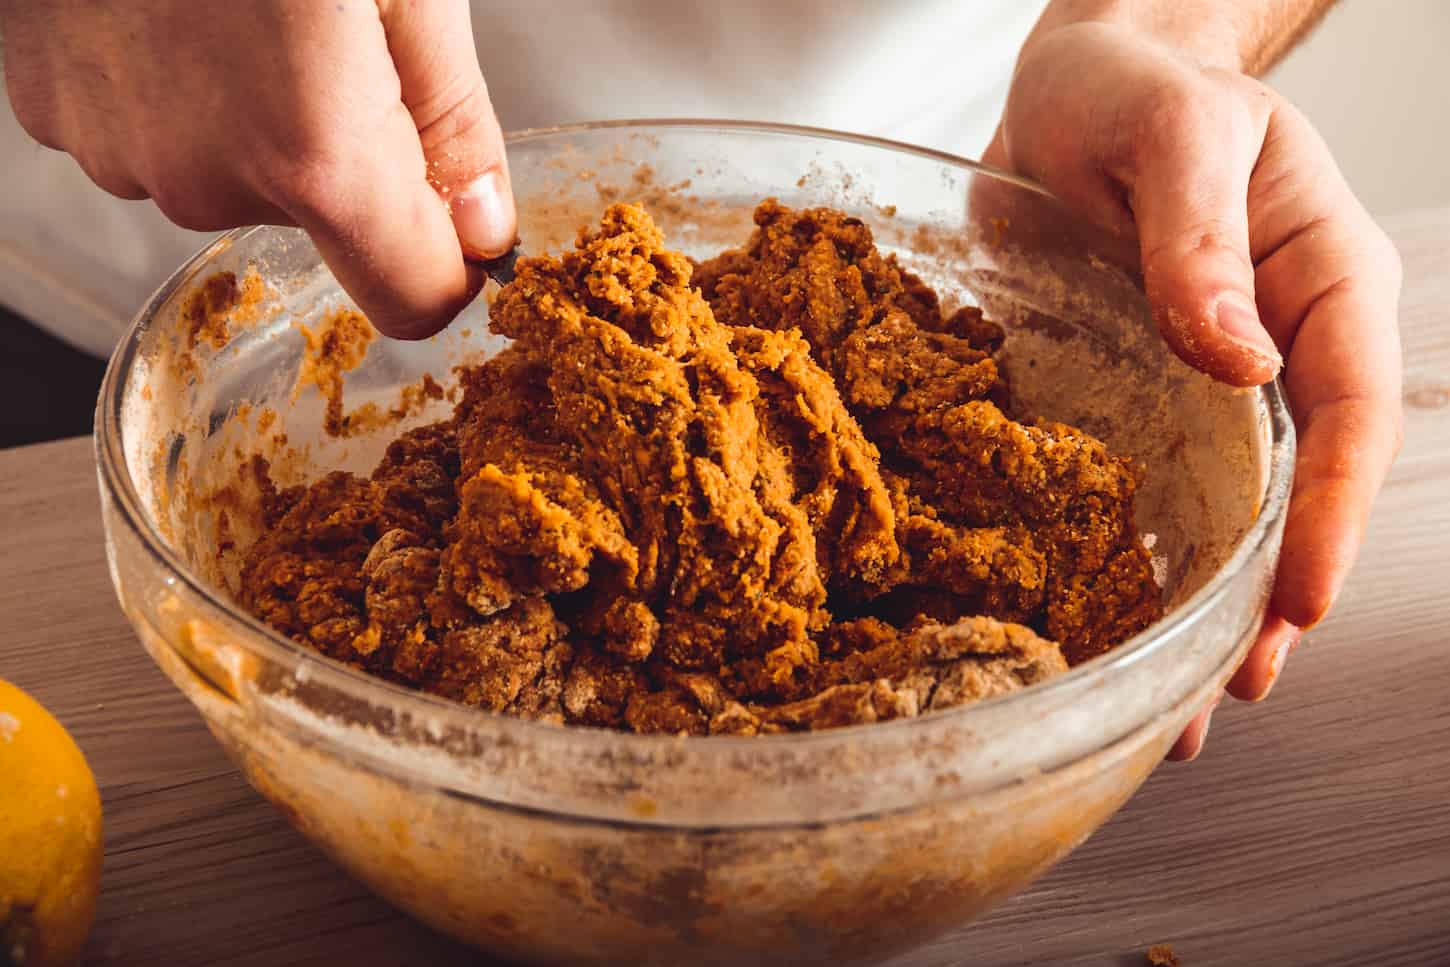 An image of a man's hands making homemade seitan in the kitchen.